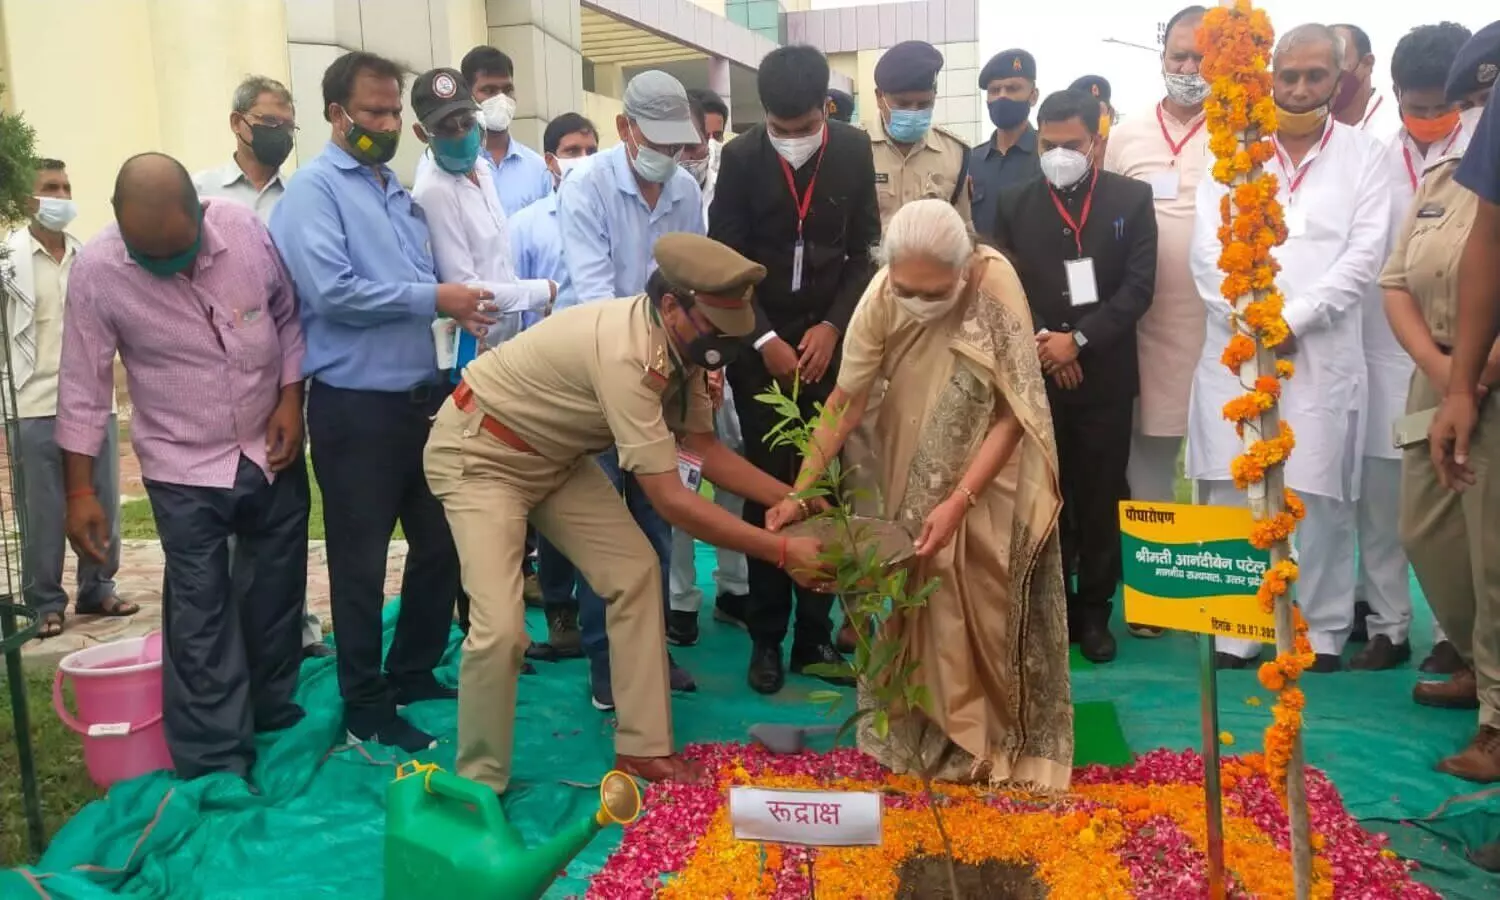 Plant a tree in Gail campus